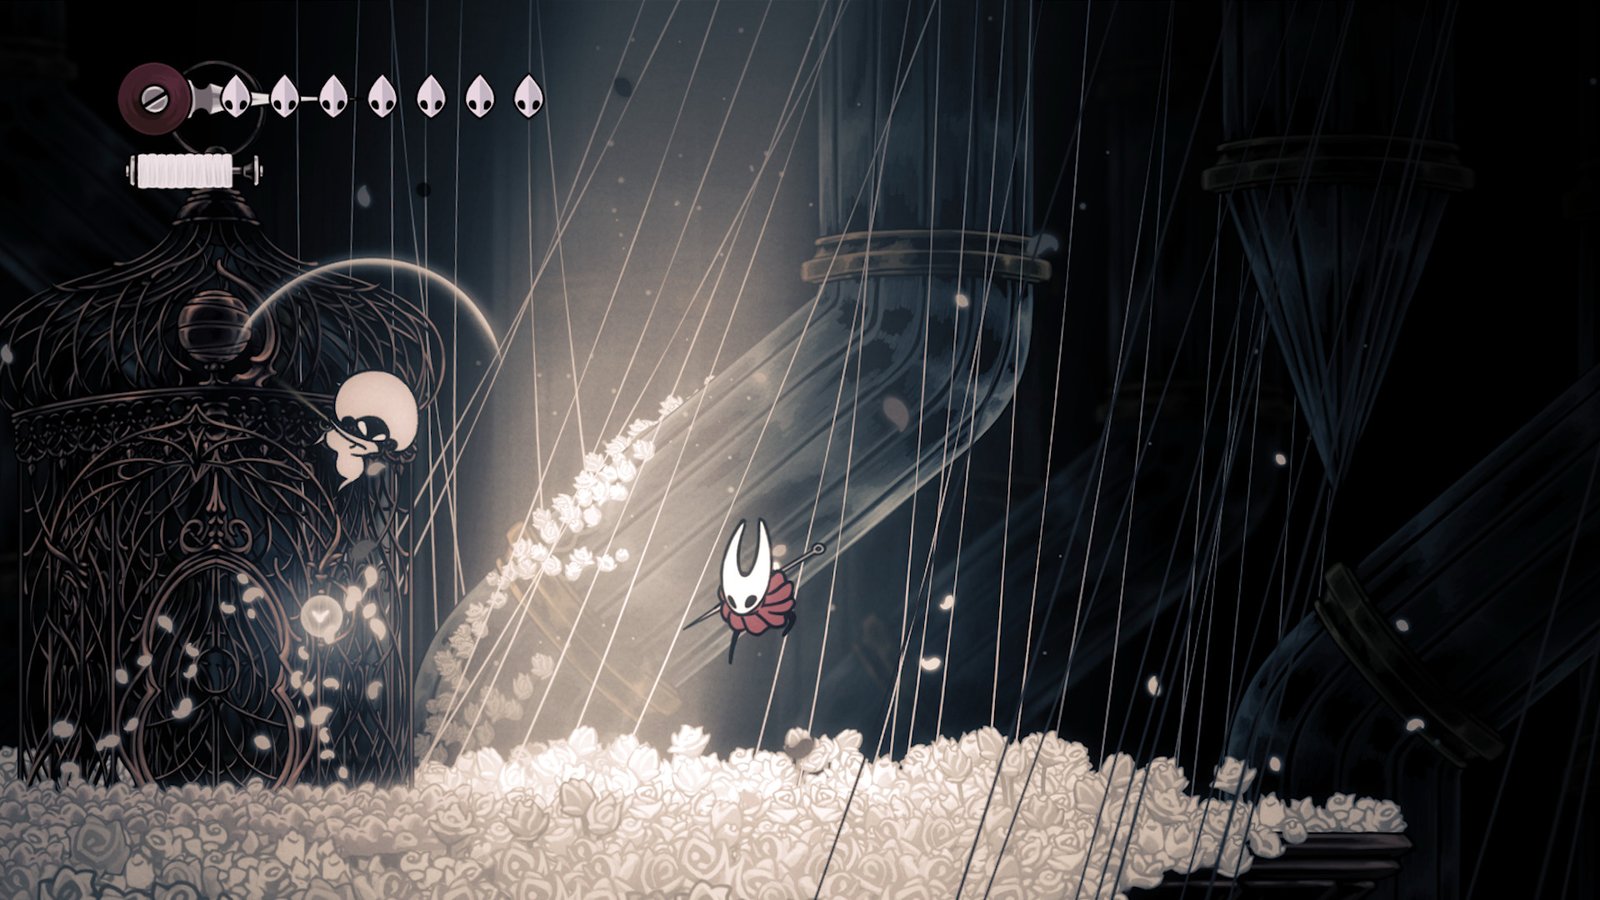 Screenshot from Hollow Knight: Silksong. Protagonist Hornet is falling towards the floor.